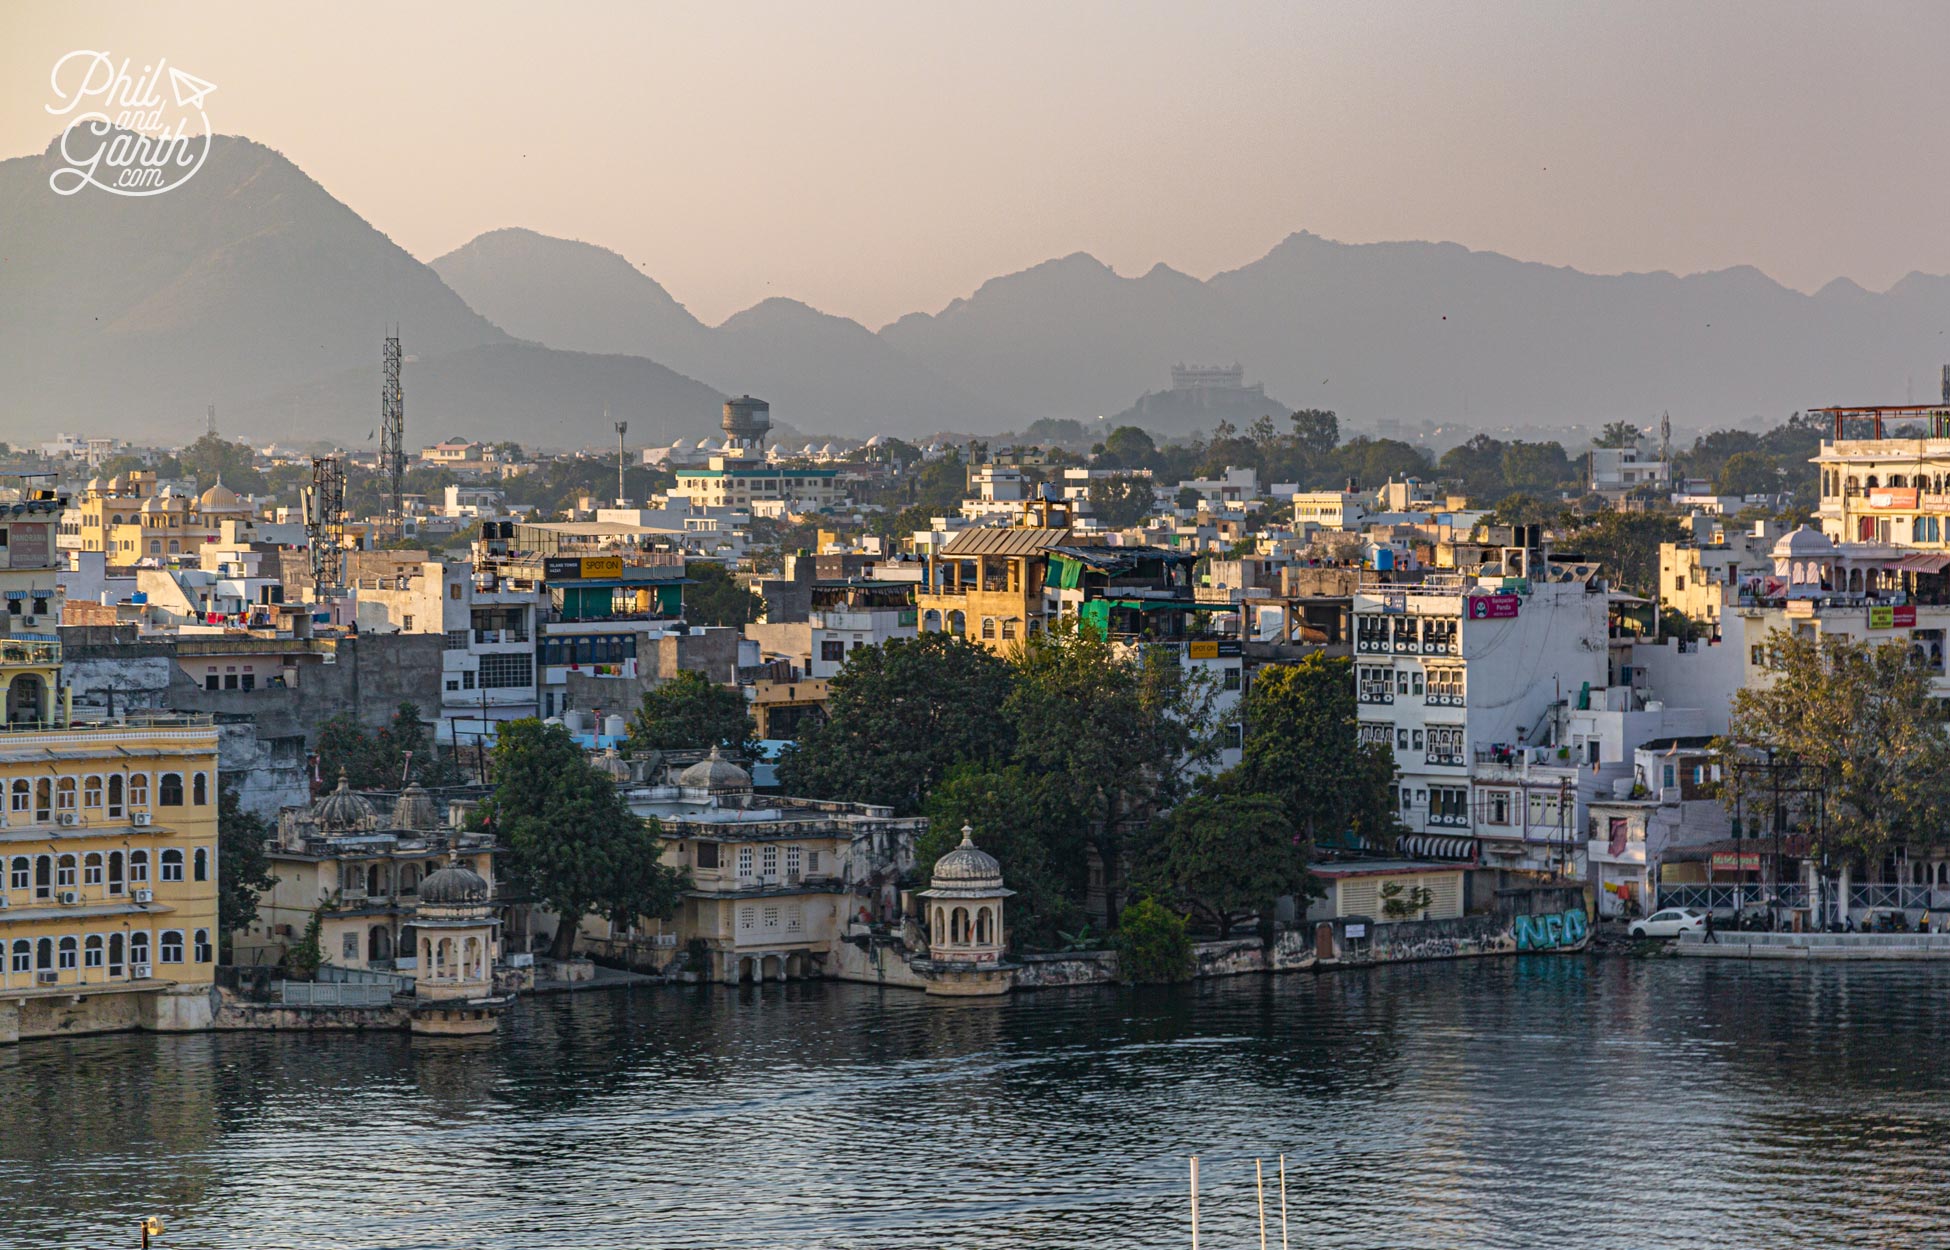 Built on the shore of Lake Pichola, Udaipur is surrounded by the dramatic Aravalli mountains